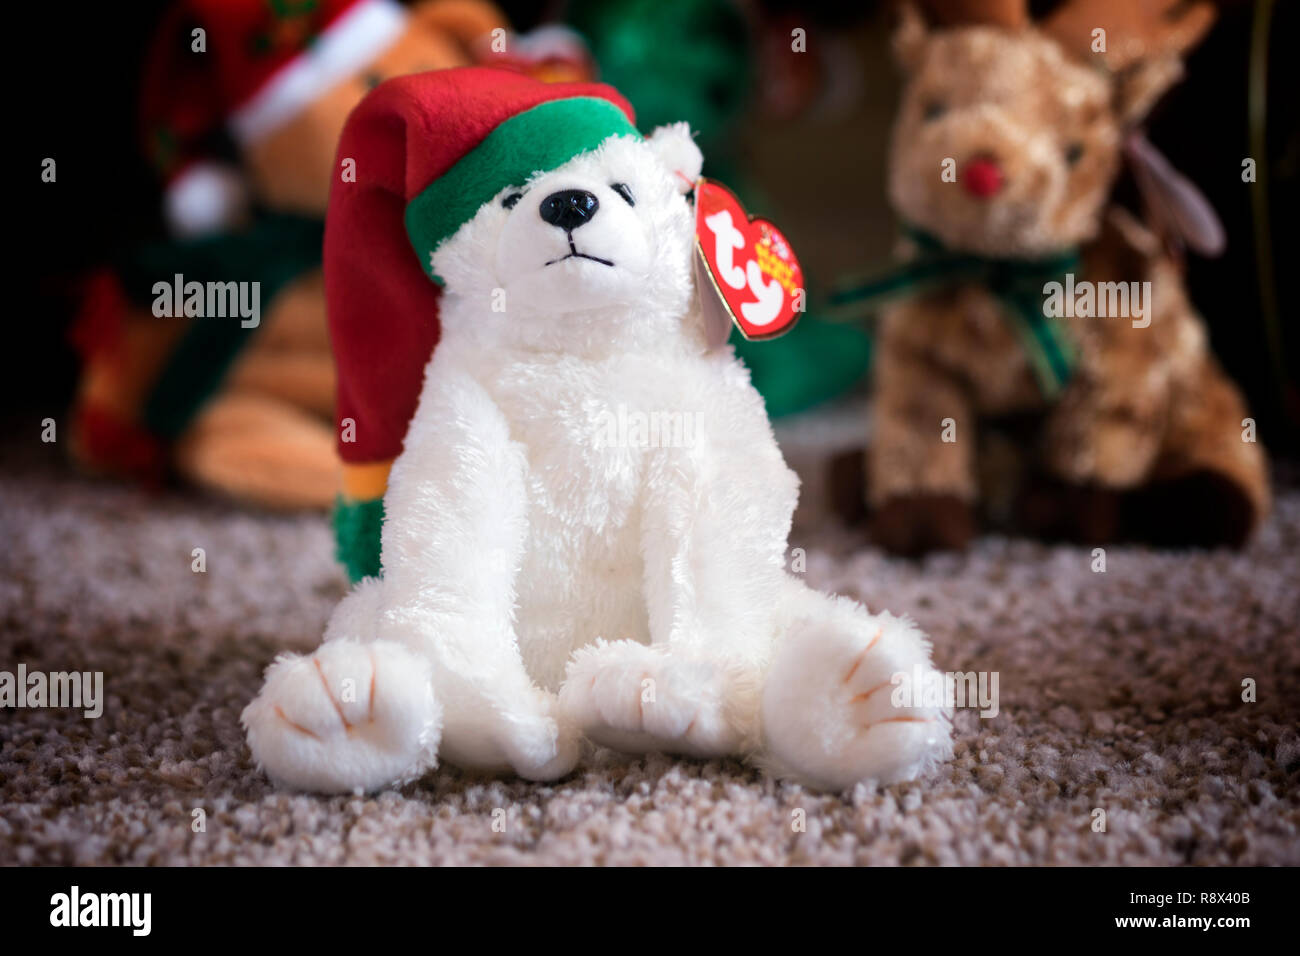 Snowdrift. A Christmas Beanie Baby from the Ty Comapny. Stock Photo